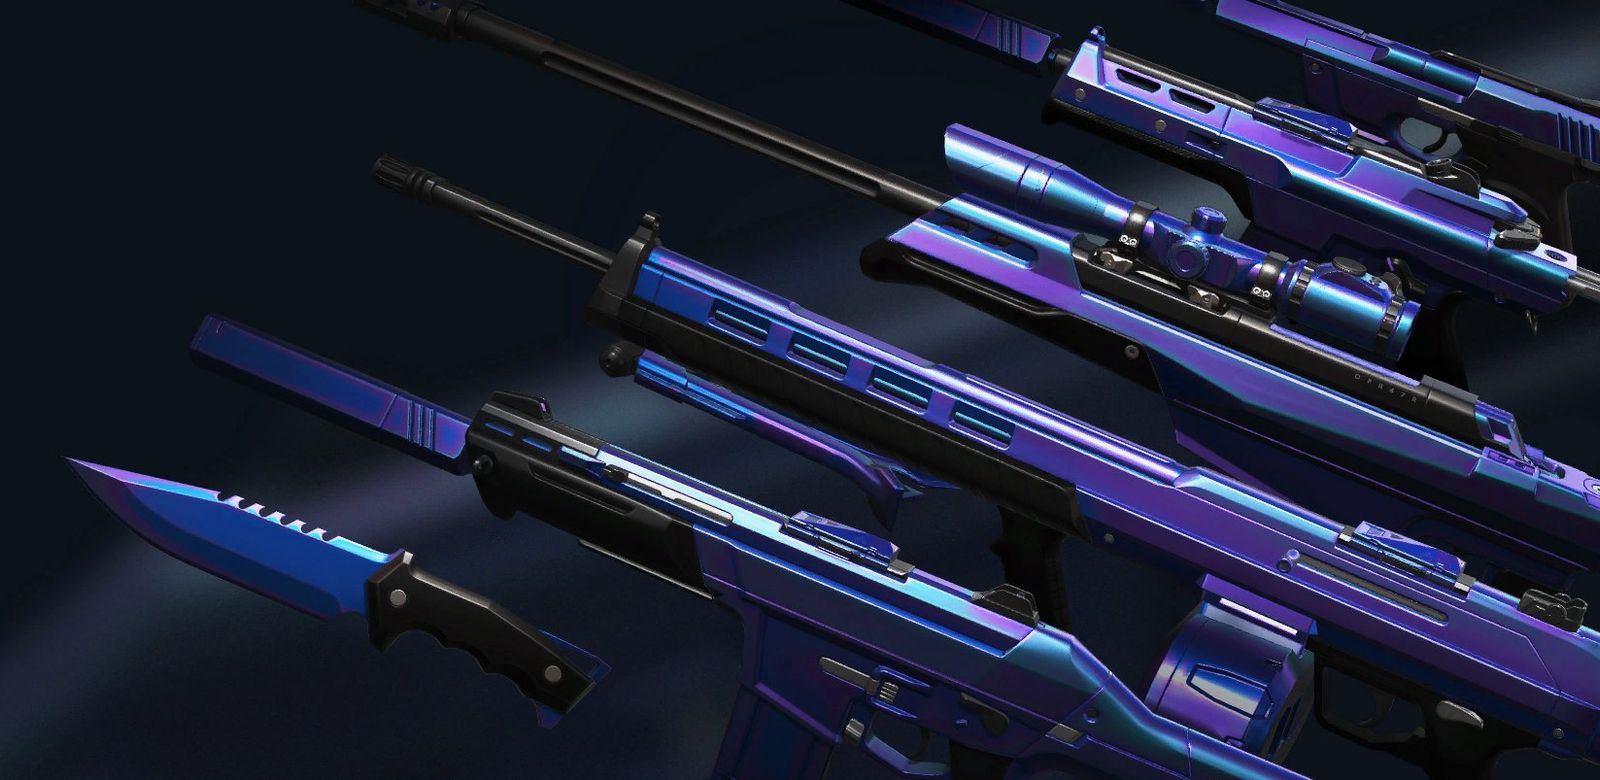 Valorant: All Weapon Skins And Bundles In Riot's New FPS